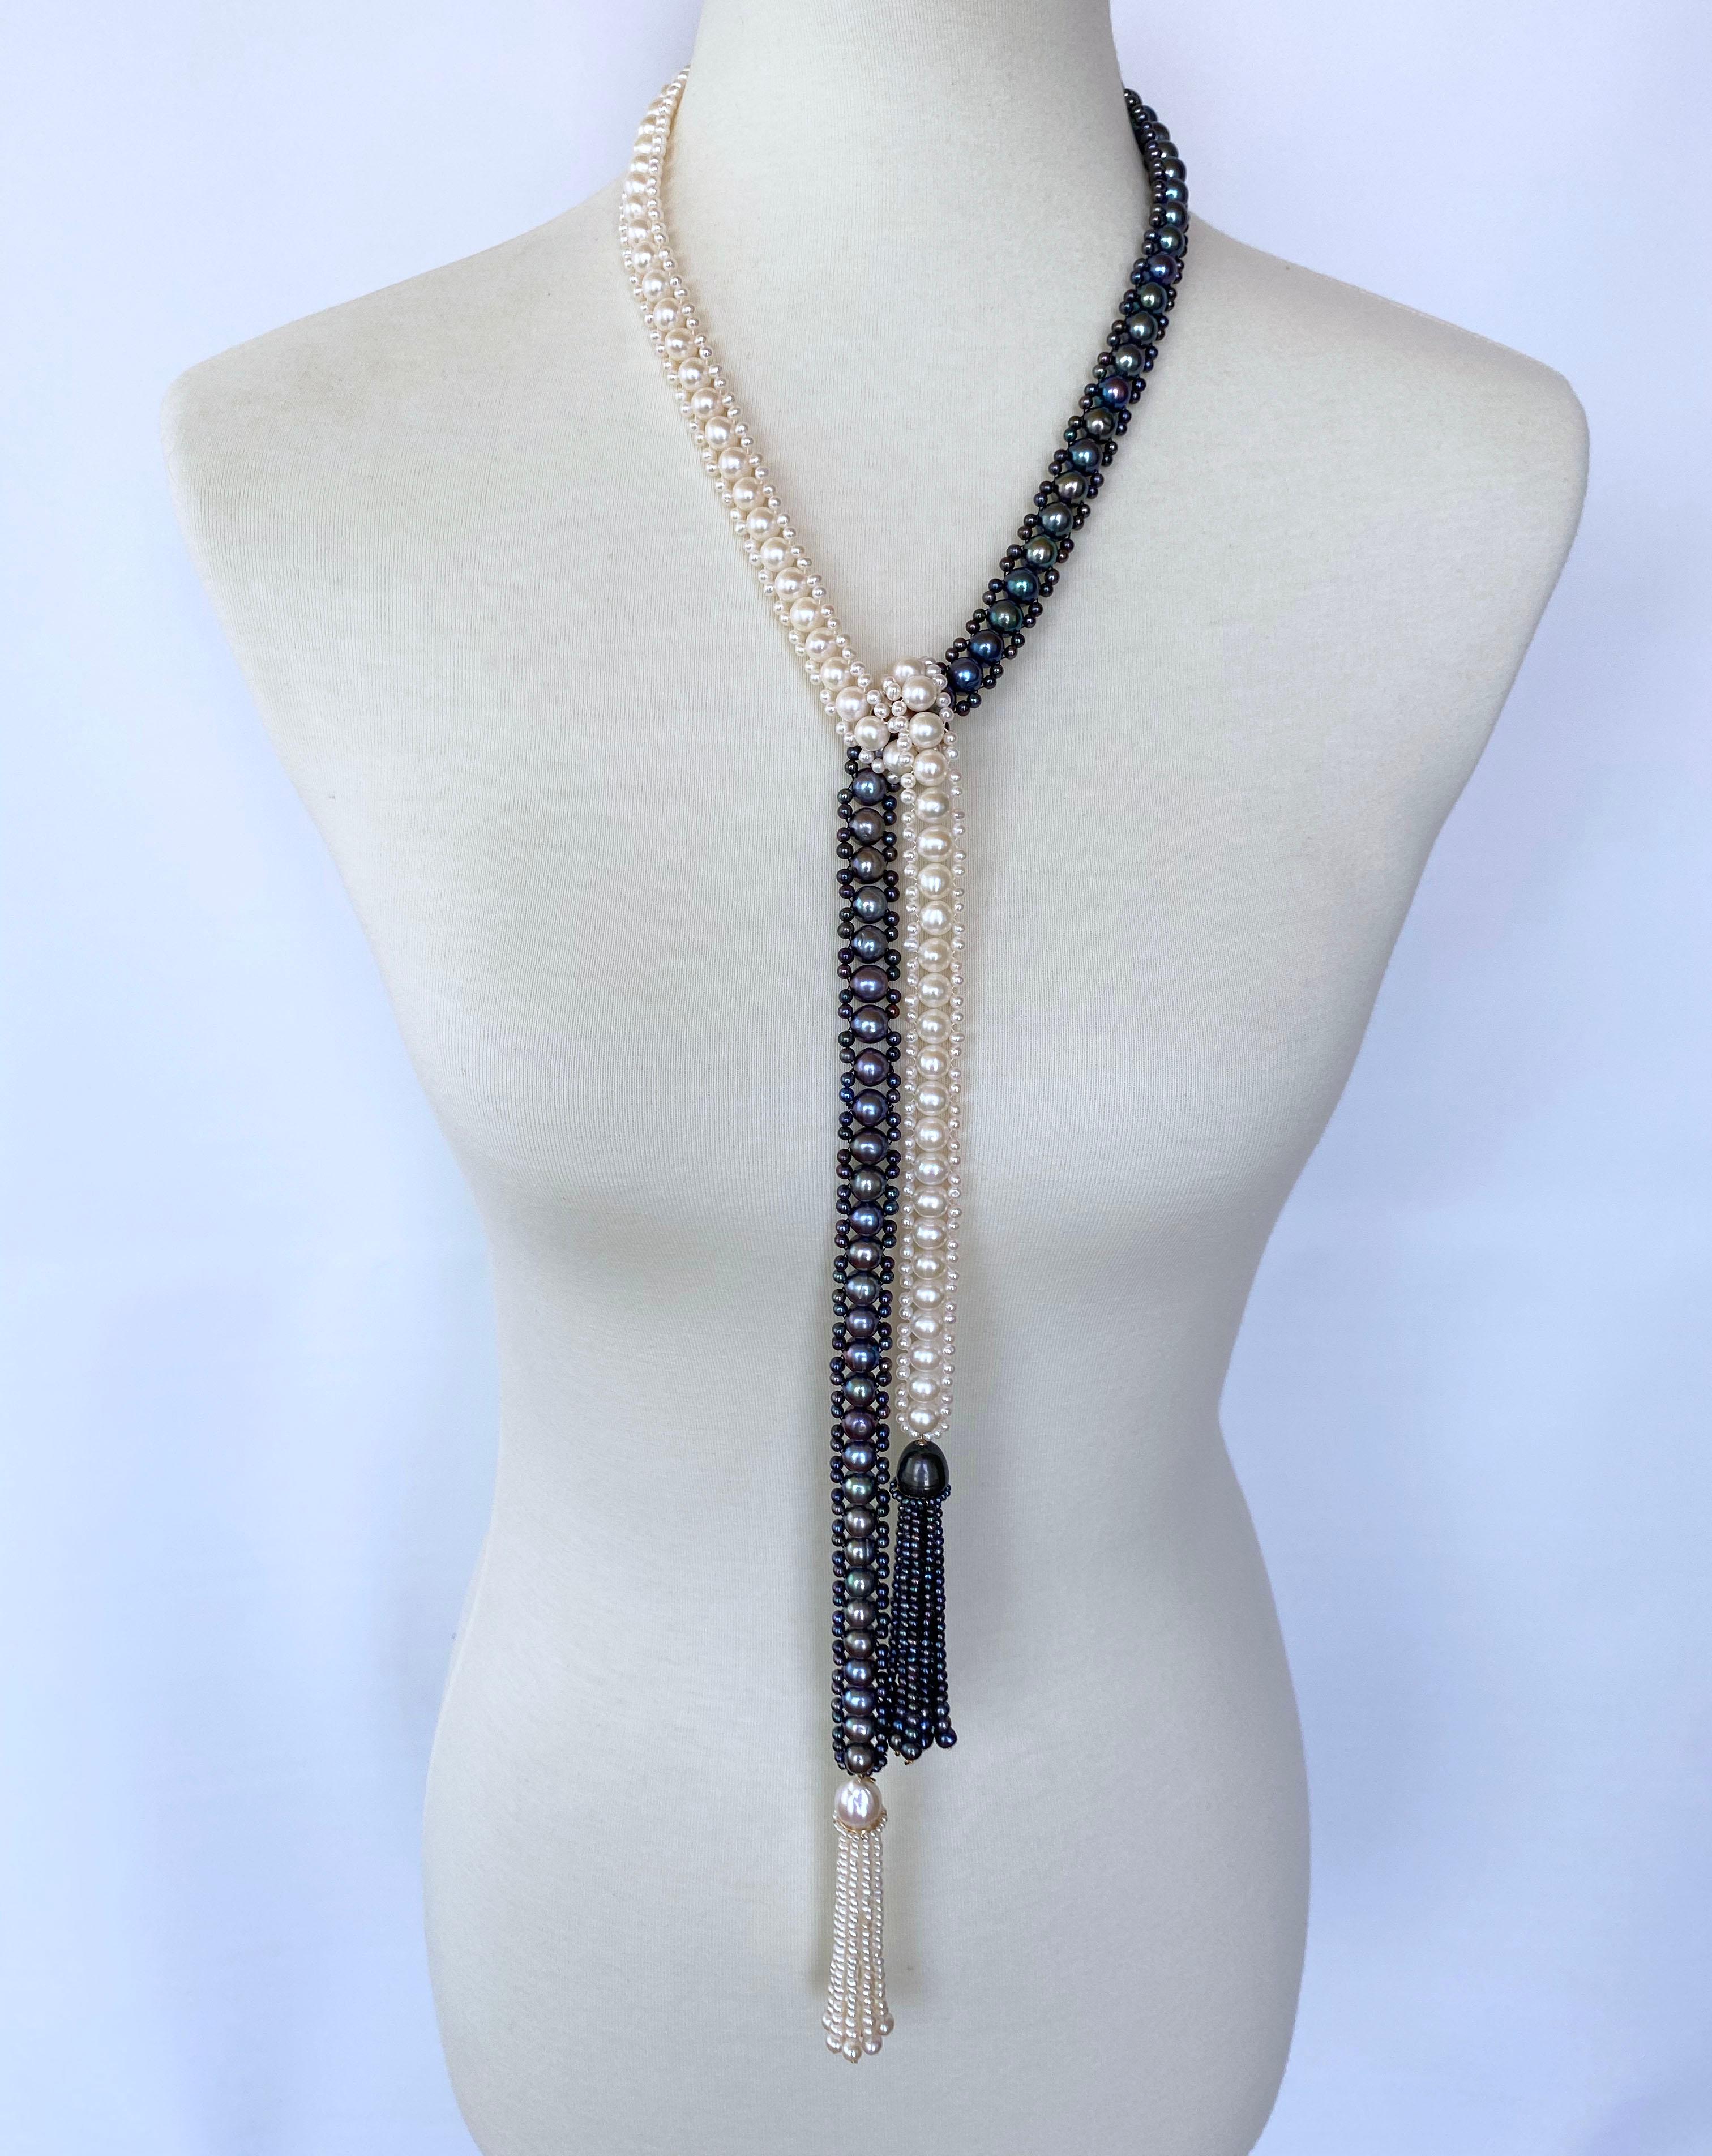 Artisan Marina J. Black and White All Pearl Woven Sautoir with pearl tassels & 14K  Gold For Sale